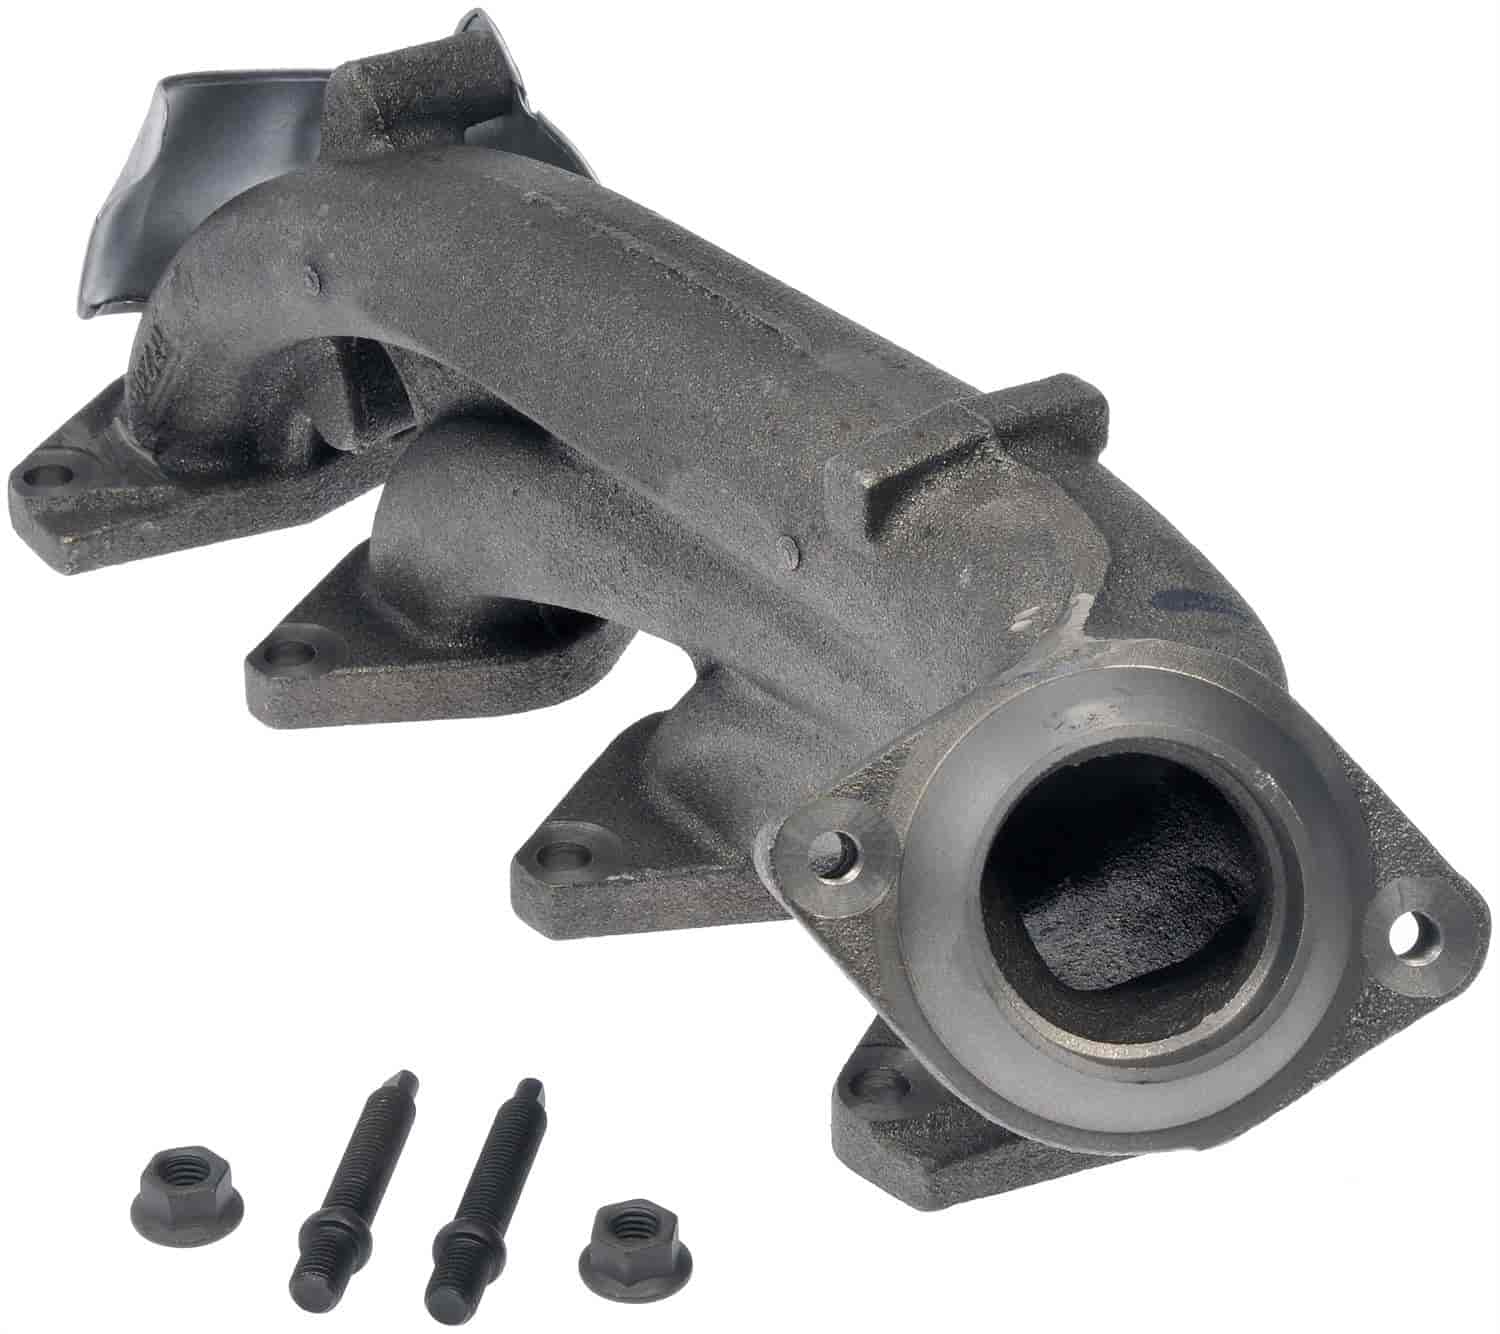 Exhaust Manifold Kit 2005-2010 Ford Super Duty Truck